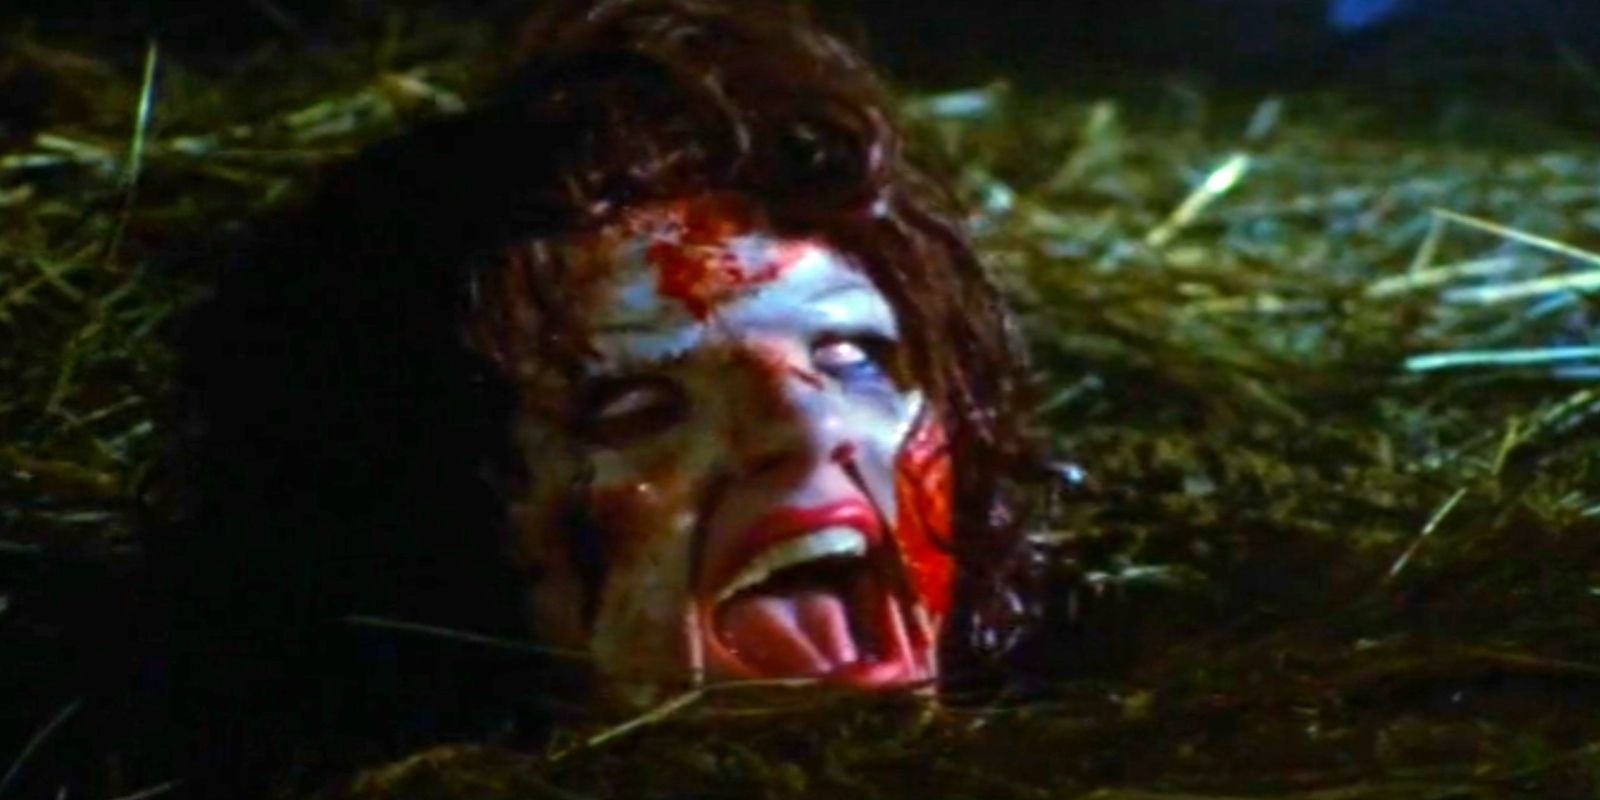 The Evil Dead 1981